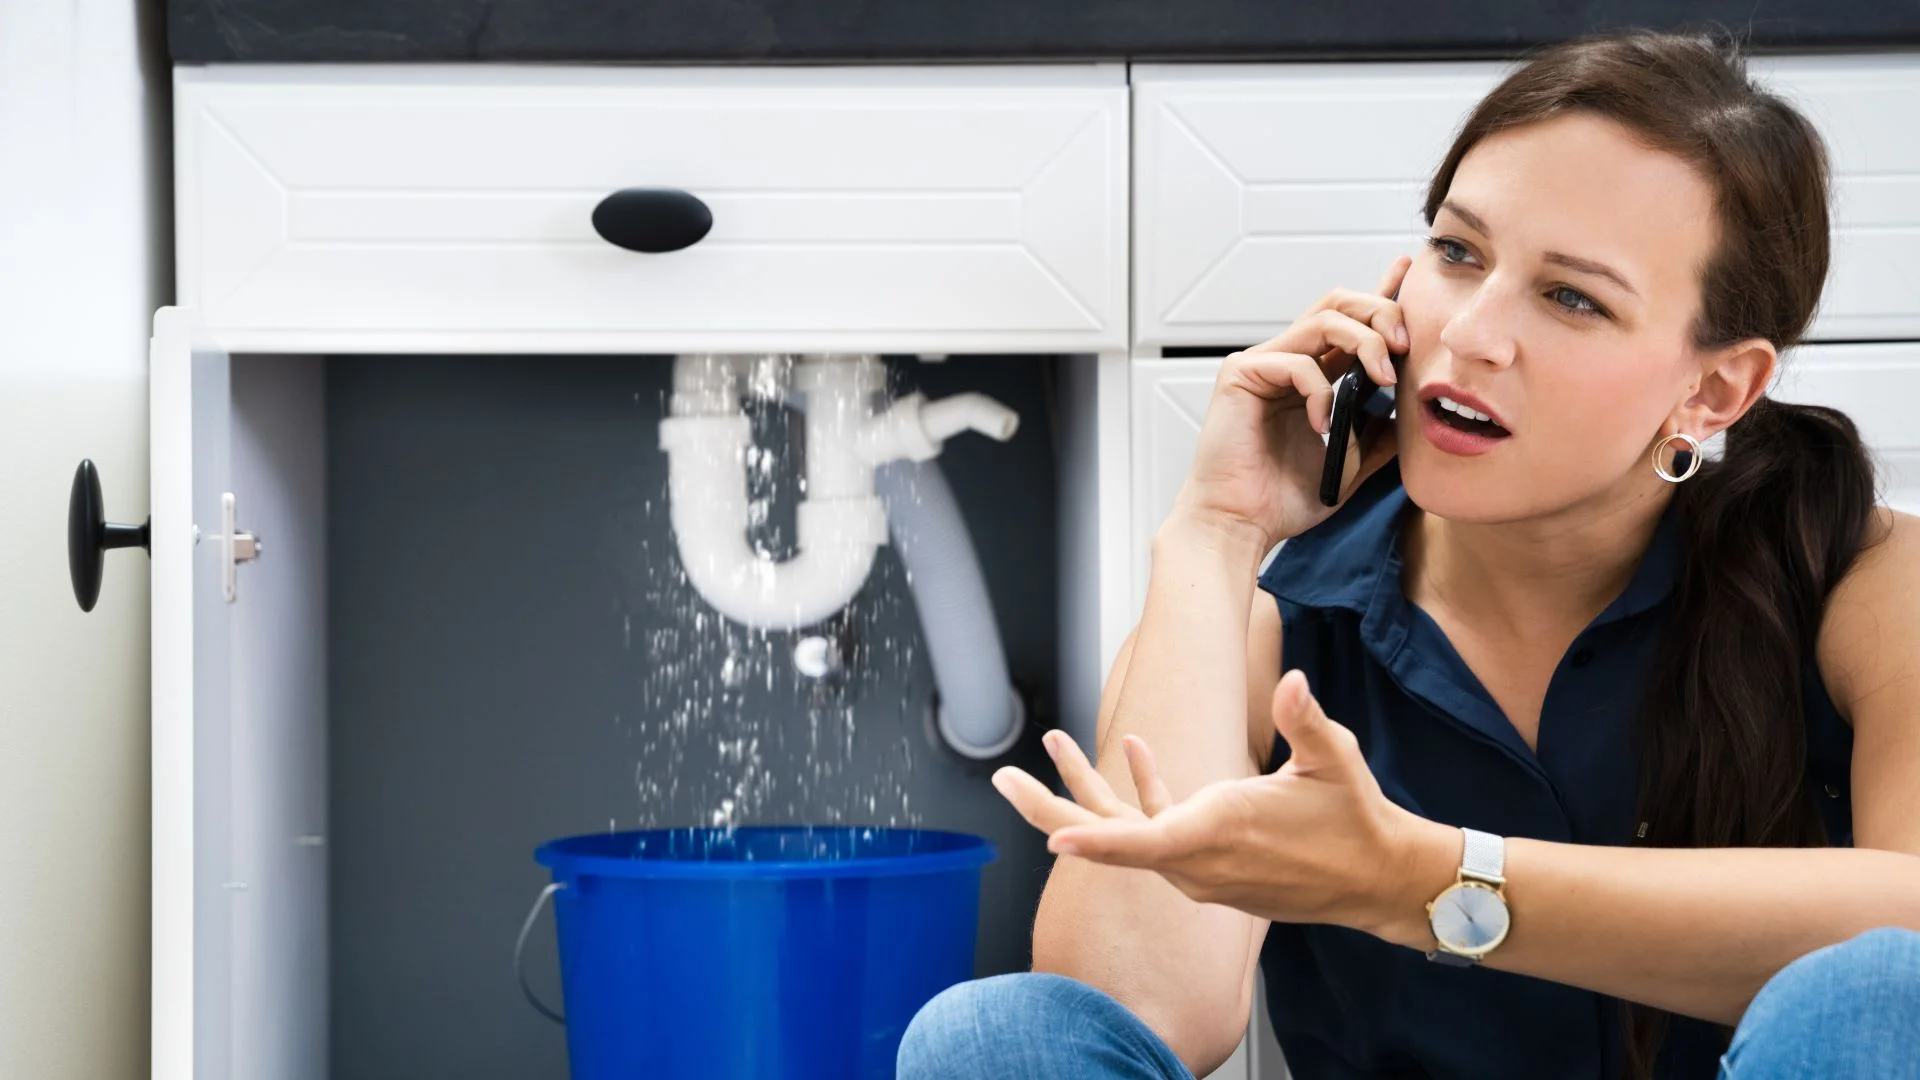 Emergency Plumbing Services in Mississauga